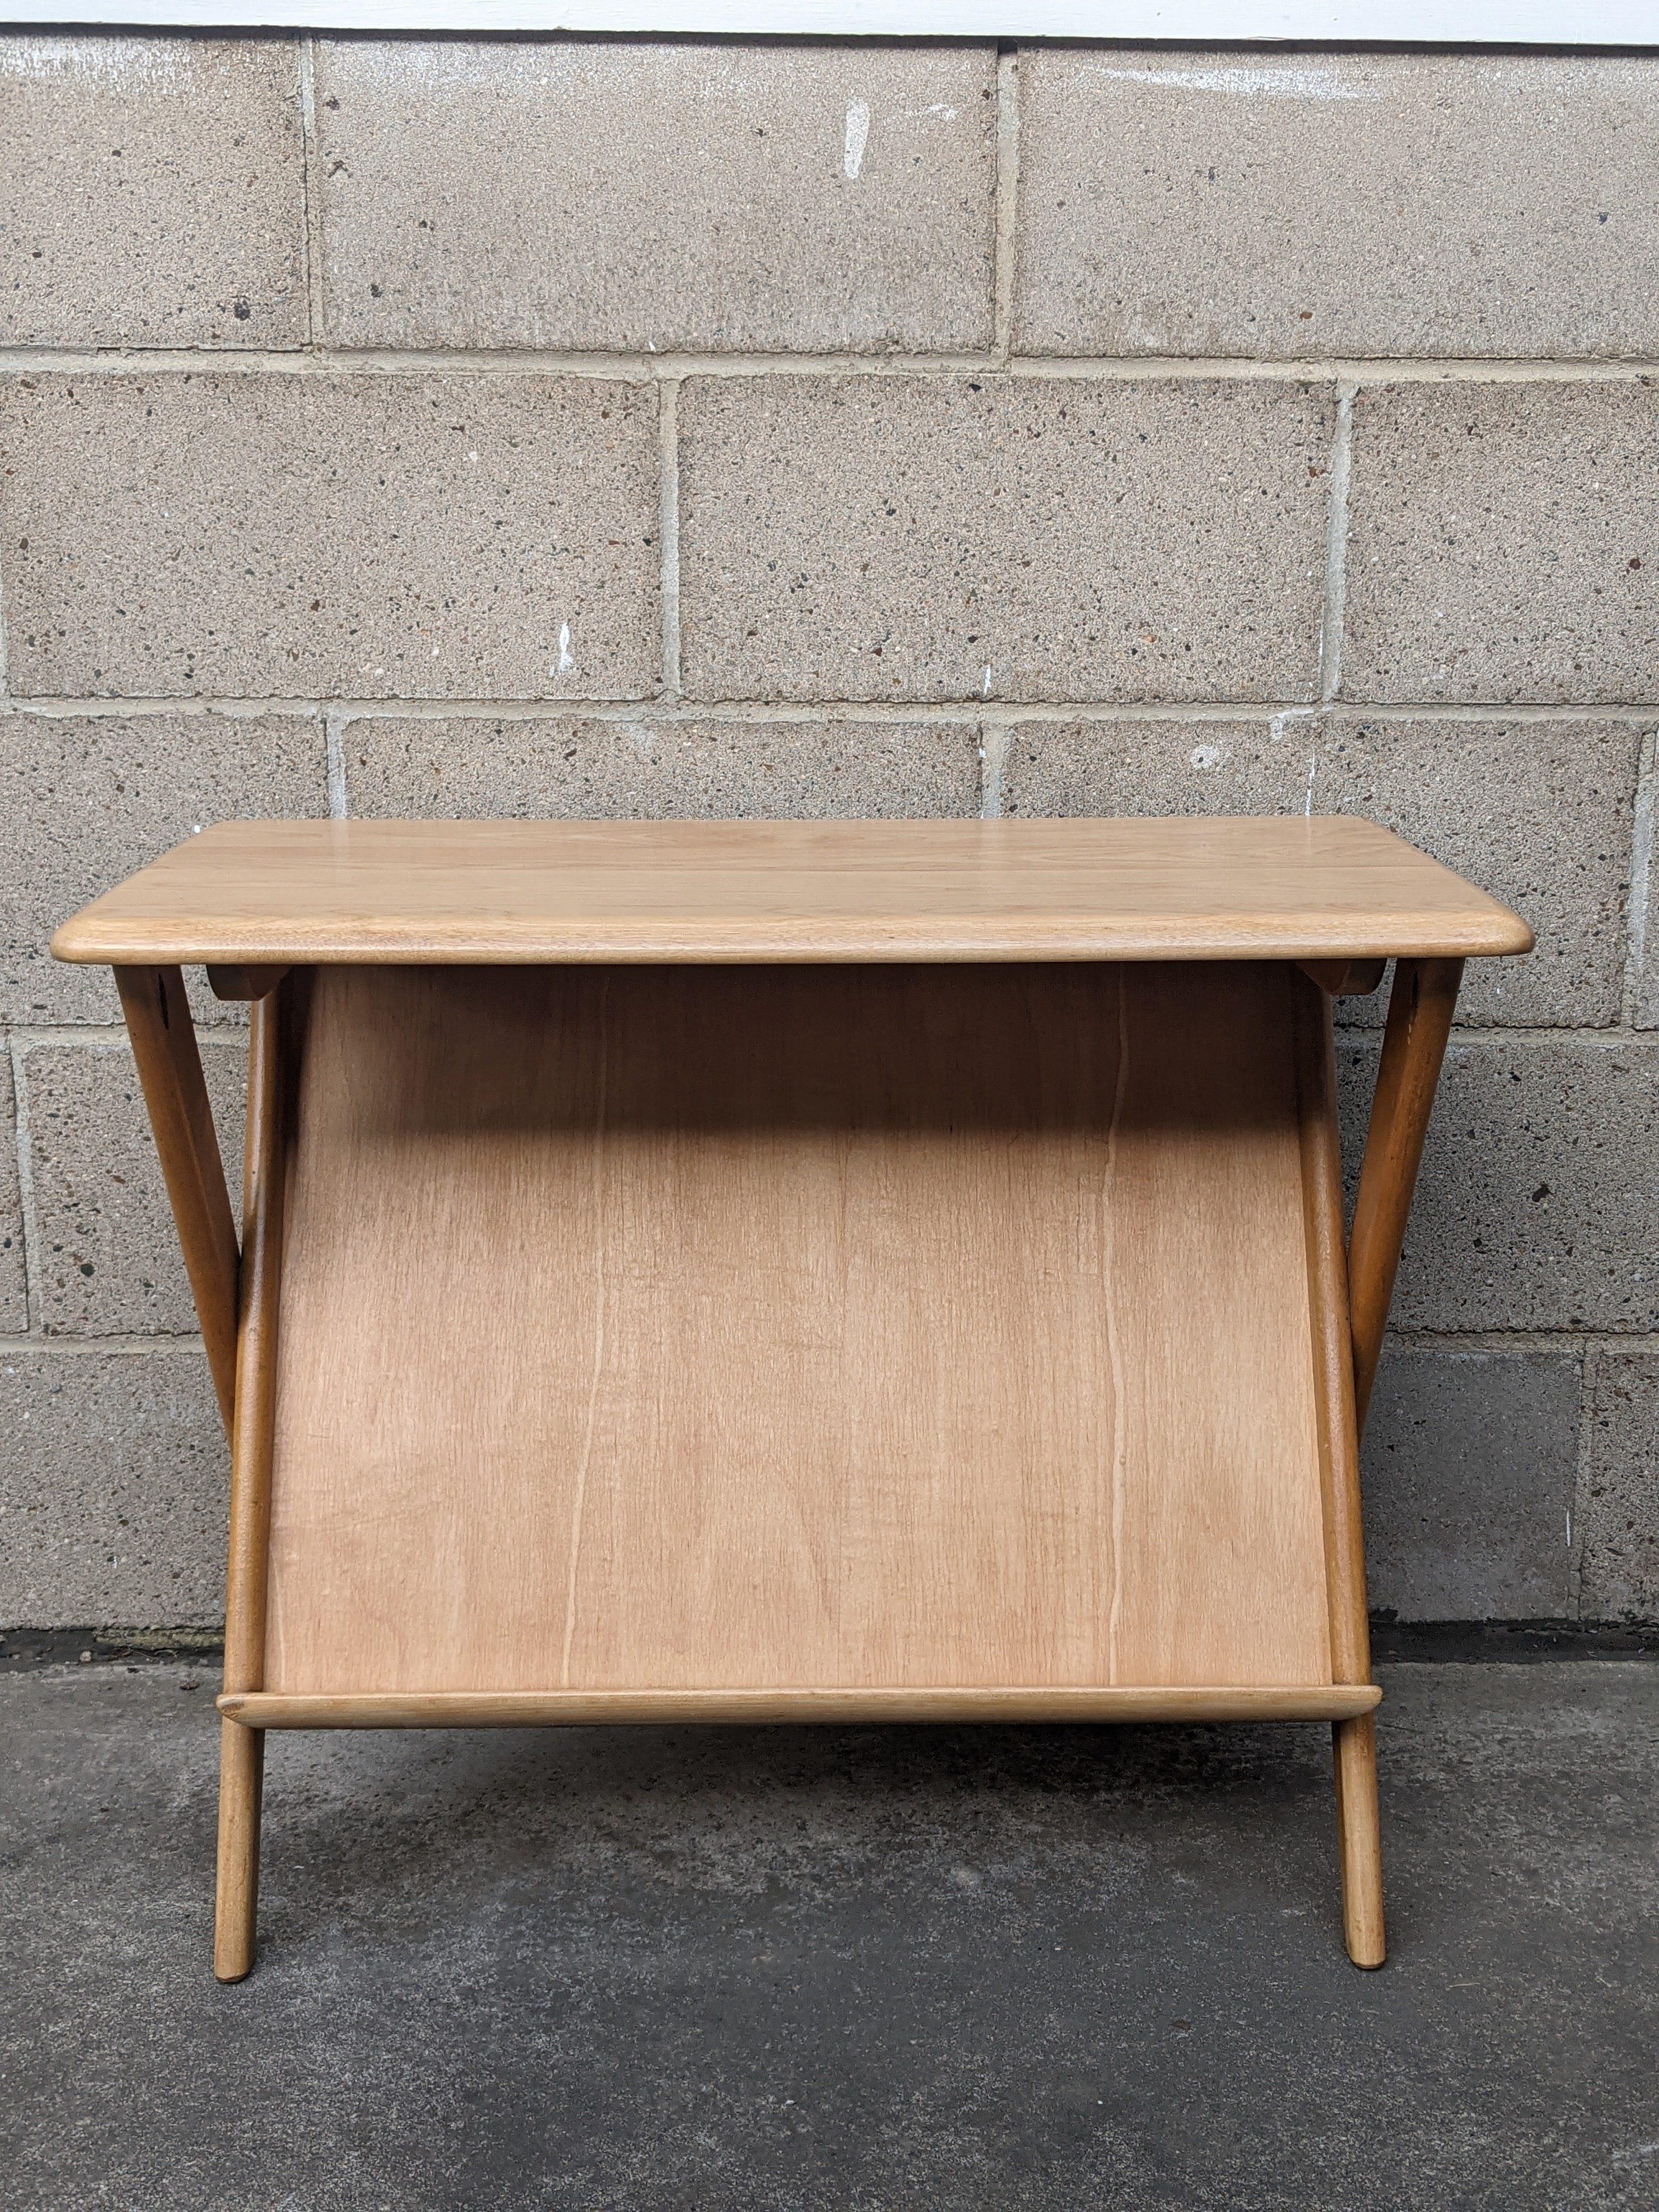 1960s Heywood Wakefield M503 Magazine Table For Sale 2